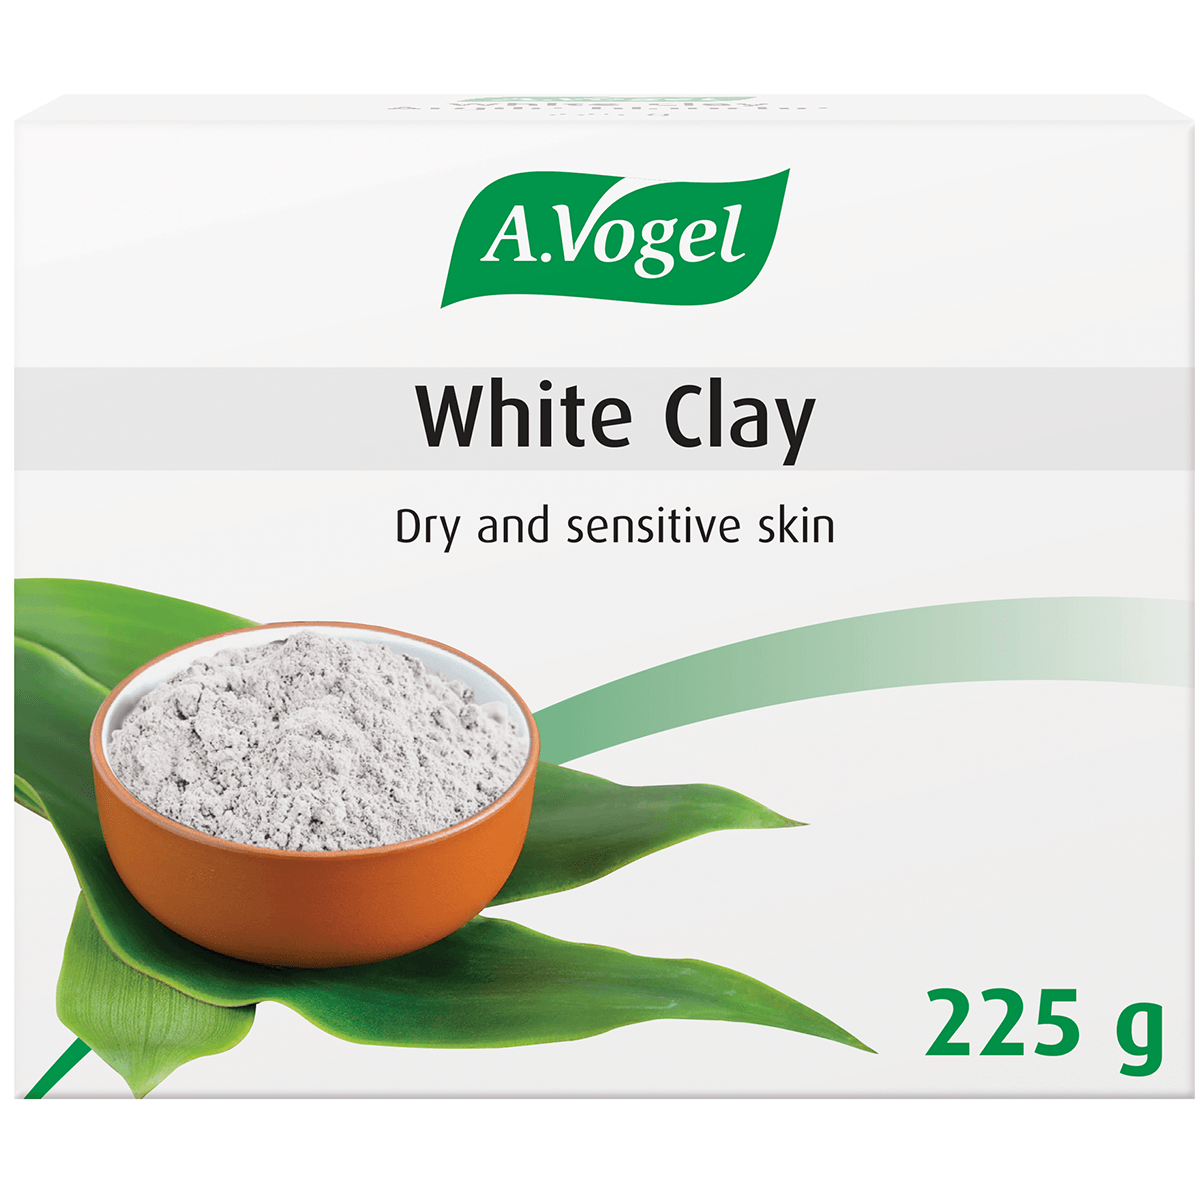 A. Vogel White Clay 225g/400g Face Mask at Village Vitamin Store